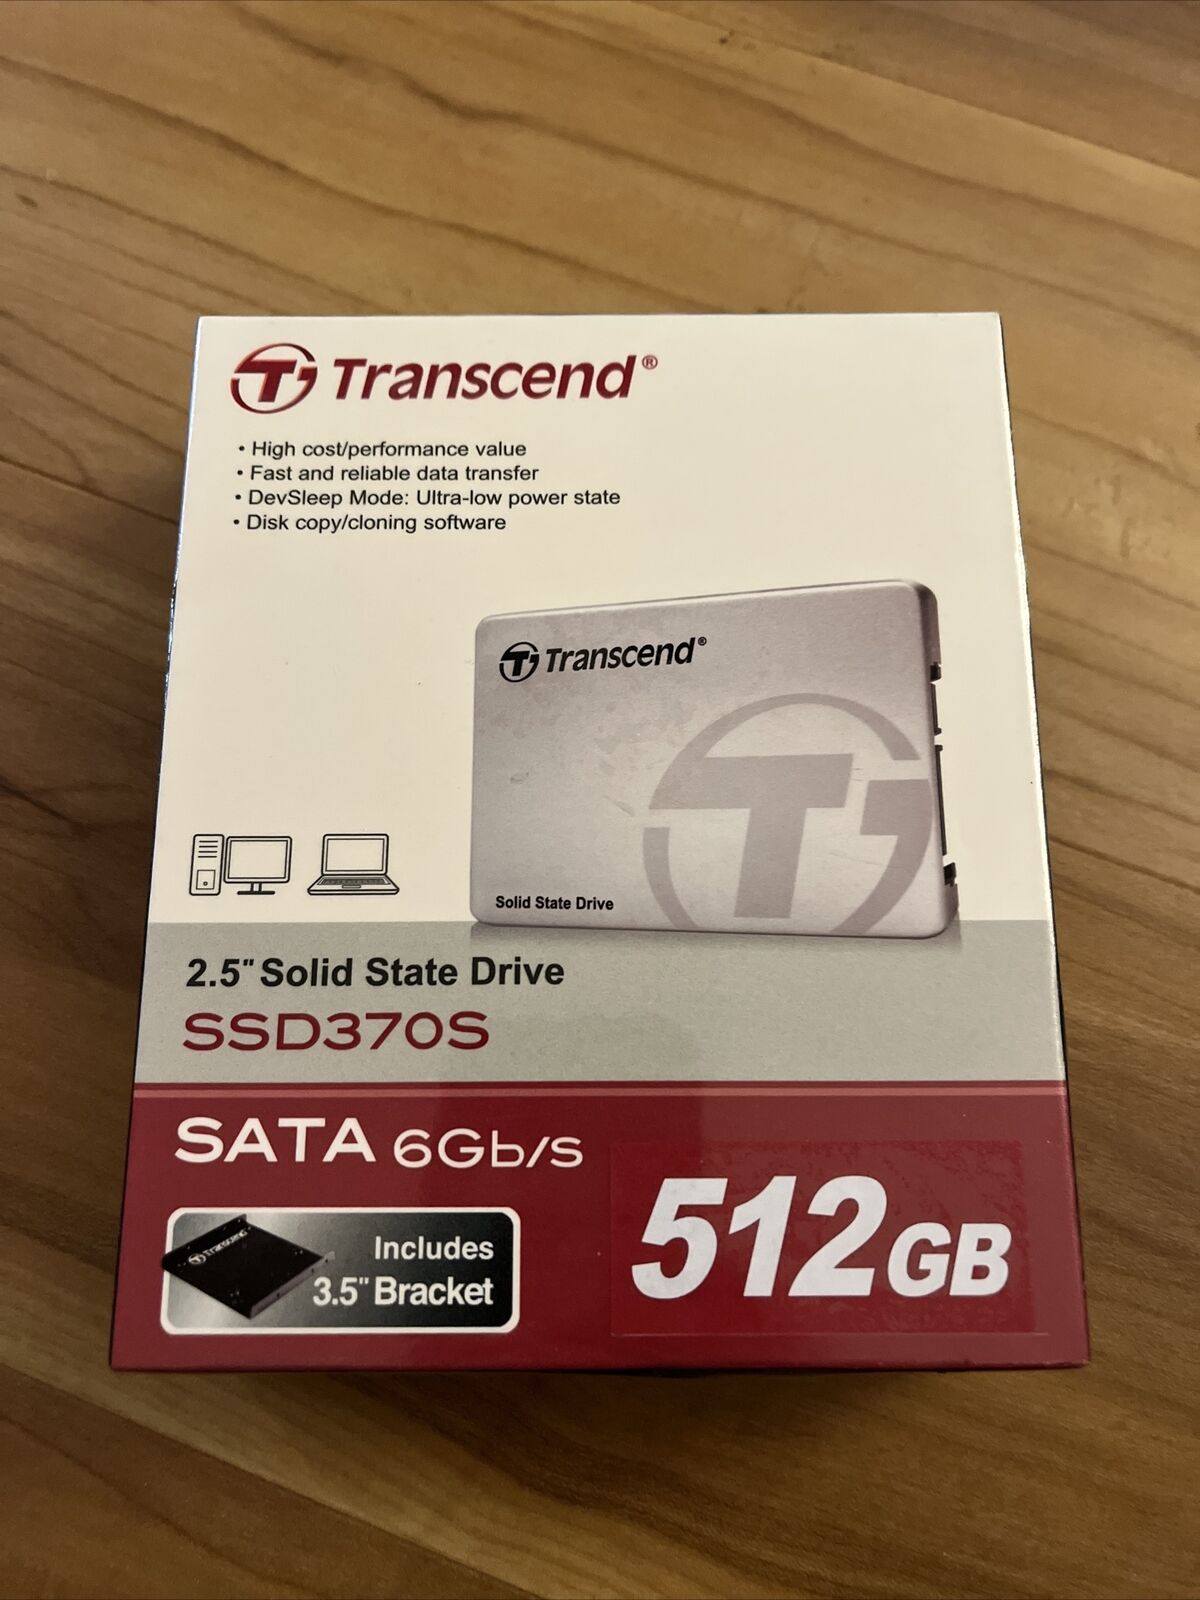 Transcend Solid State Drive 512GB SSD 370S TS512GSSD370S Sata Interface New